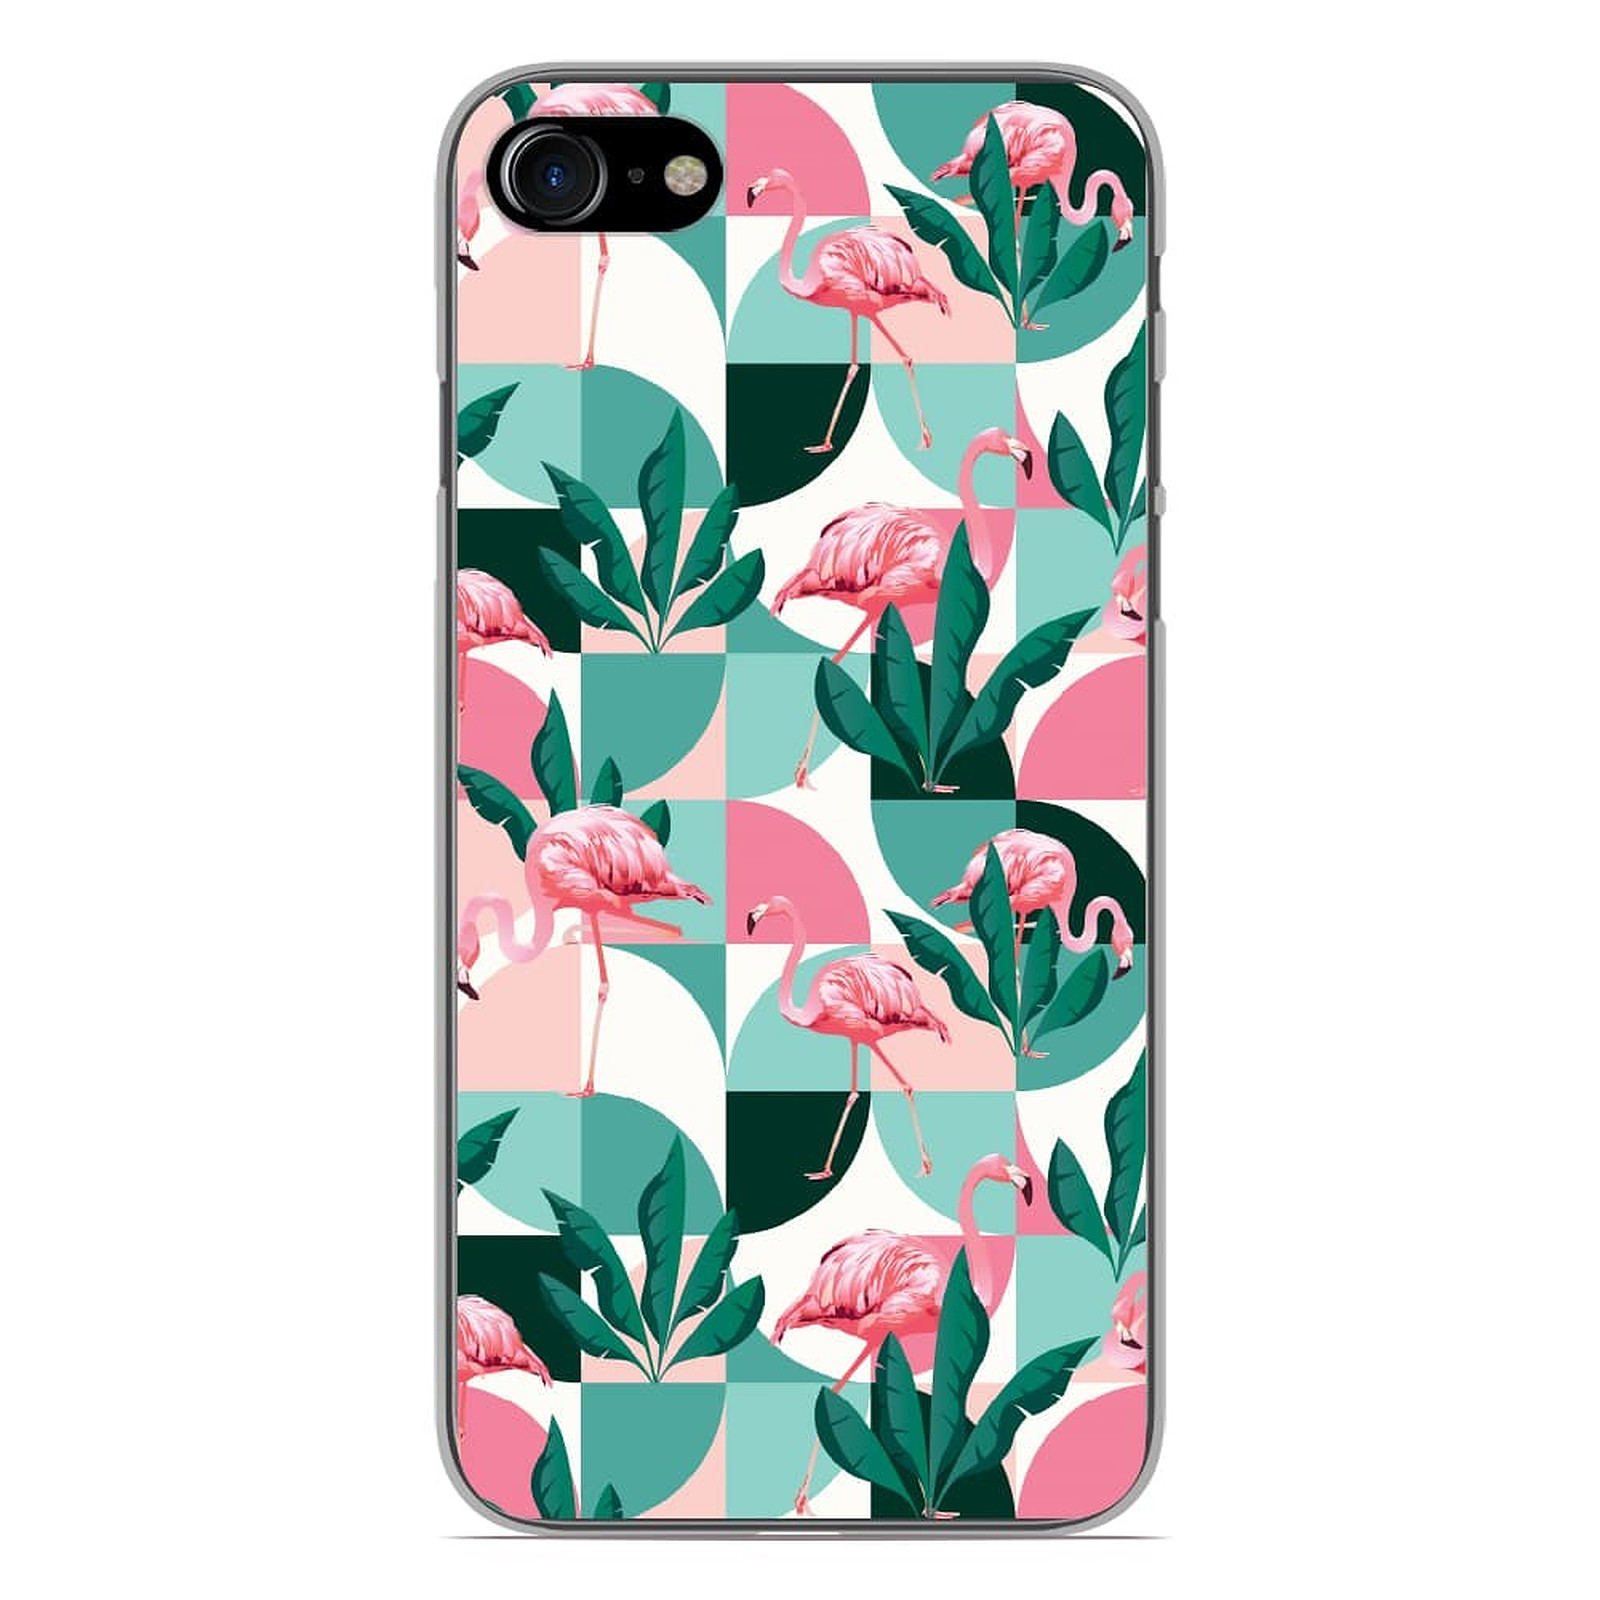 1001 Coques Coque silicone gel Apple iPhone 7 motif Flamants Roses ge´ome´trique - Coque telephone 1001Coques